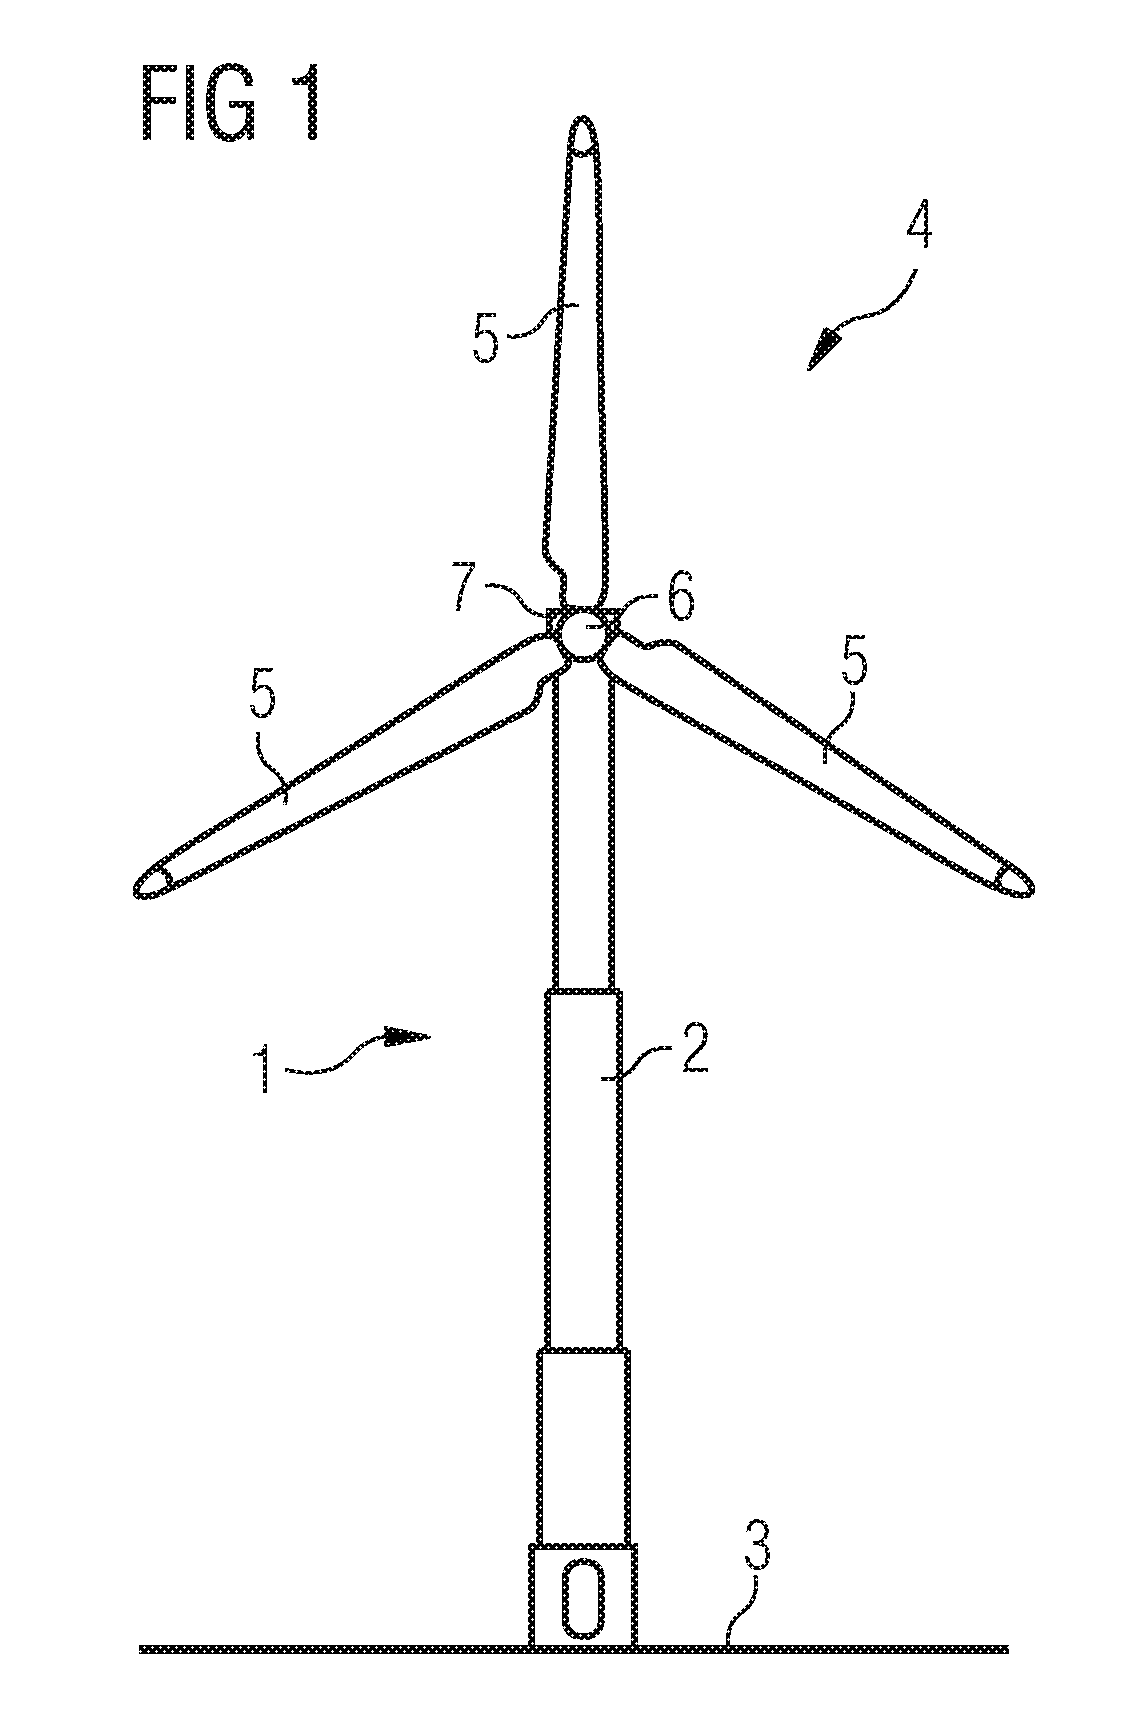 Wind turbine and method for determining at least one rotation parameter of a wind turbine rotor